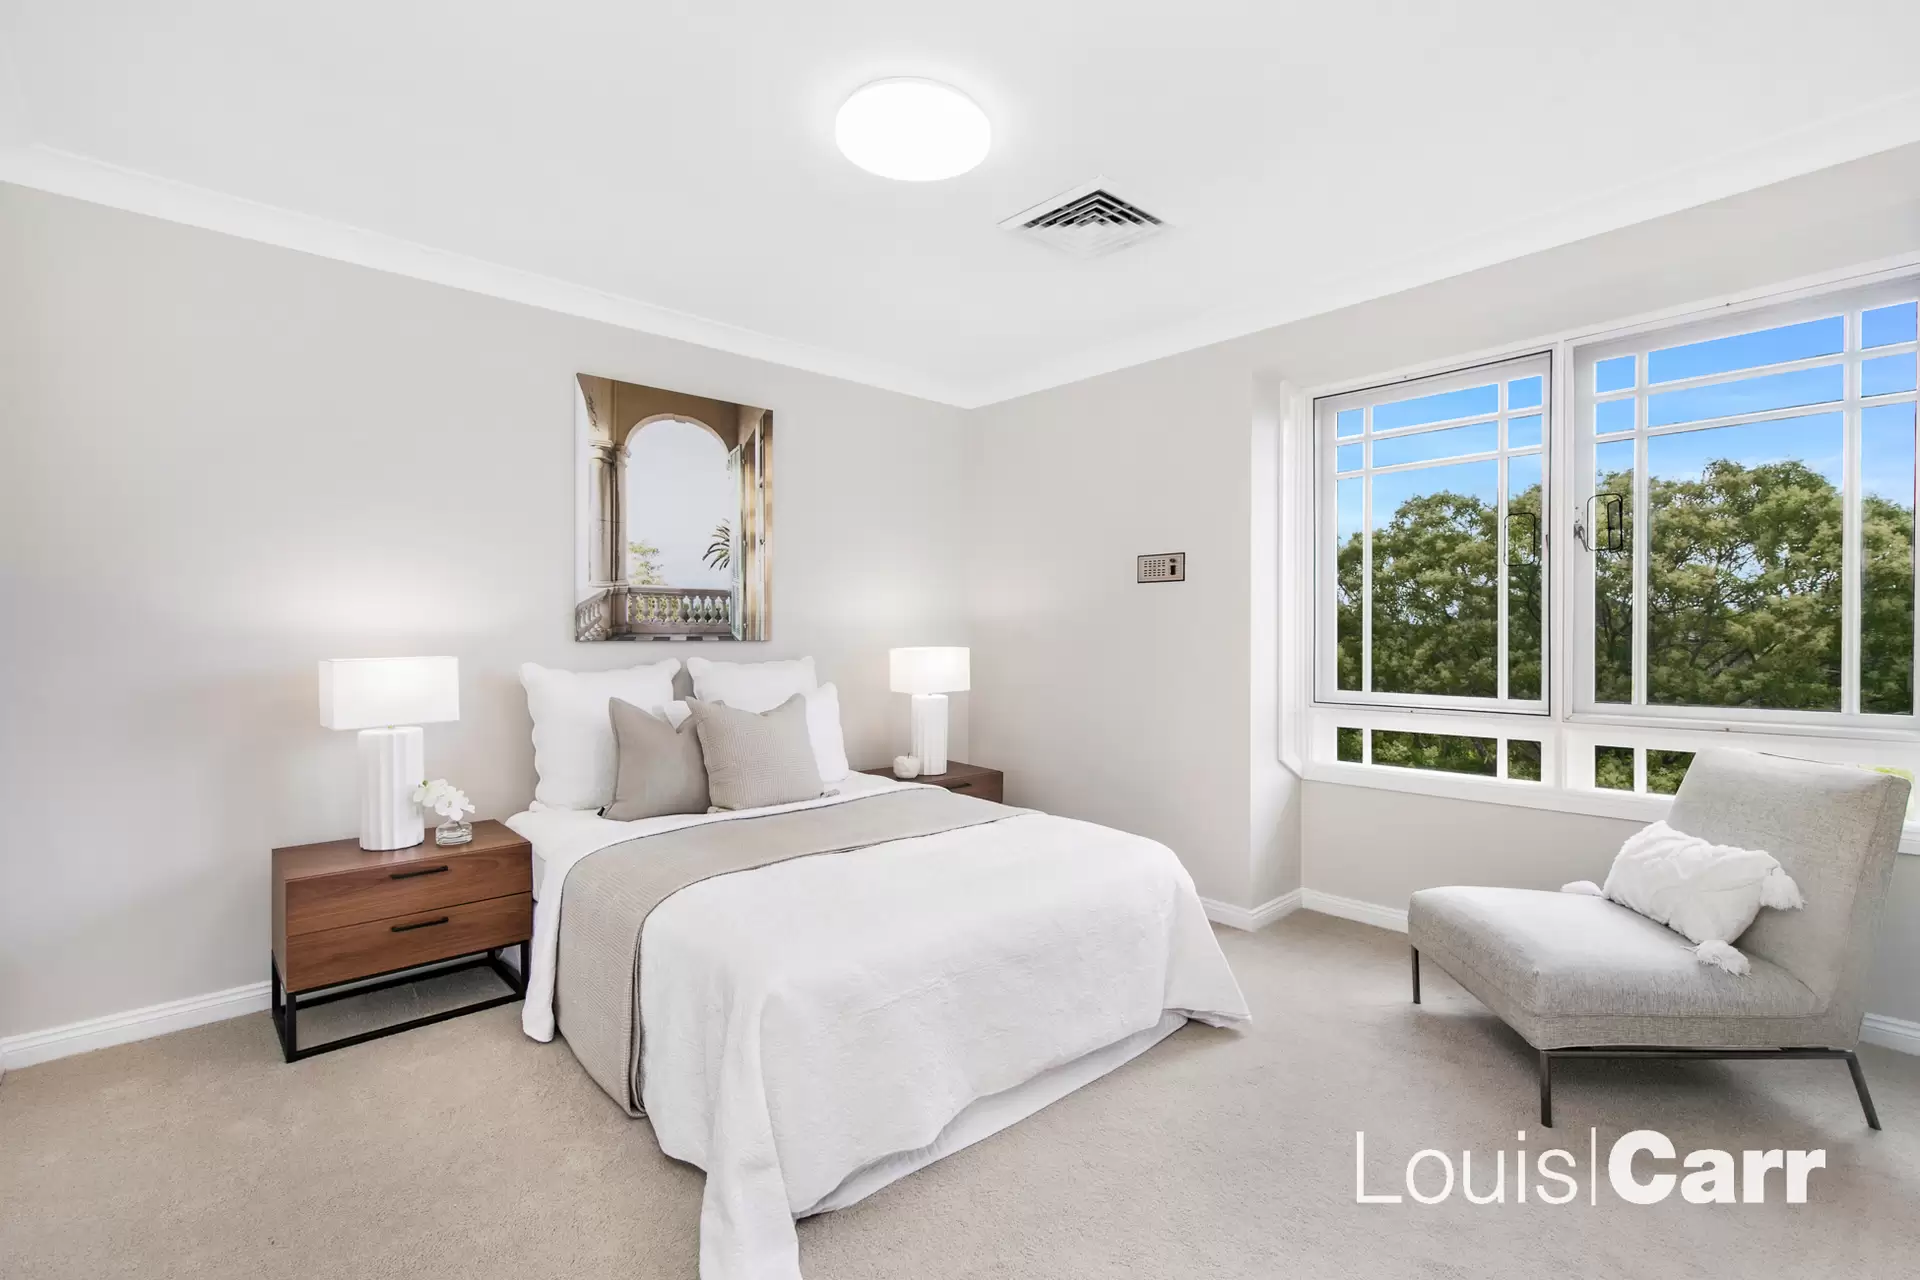 Photo #7: 16 Ellerslie Drive, West Pennant Hills - Sold by Louis Carr Real Estate